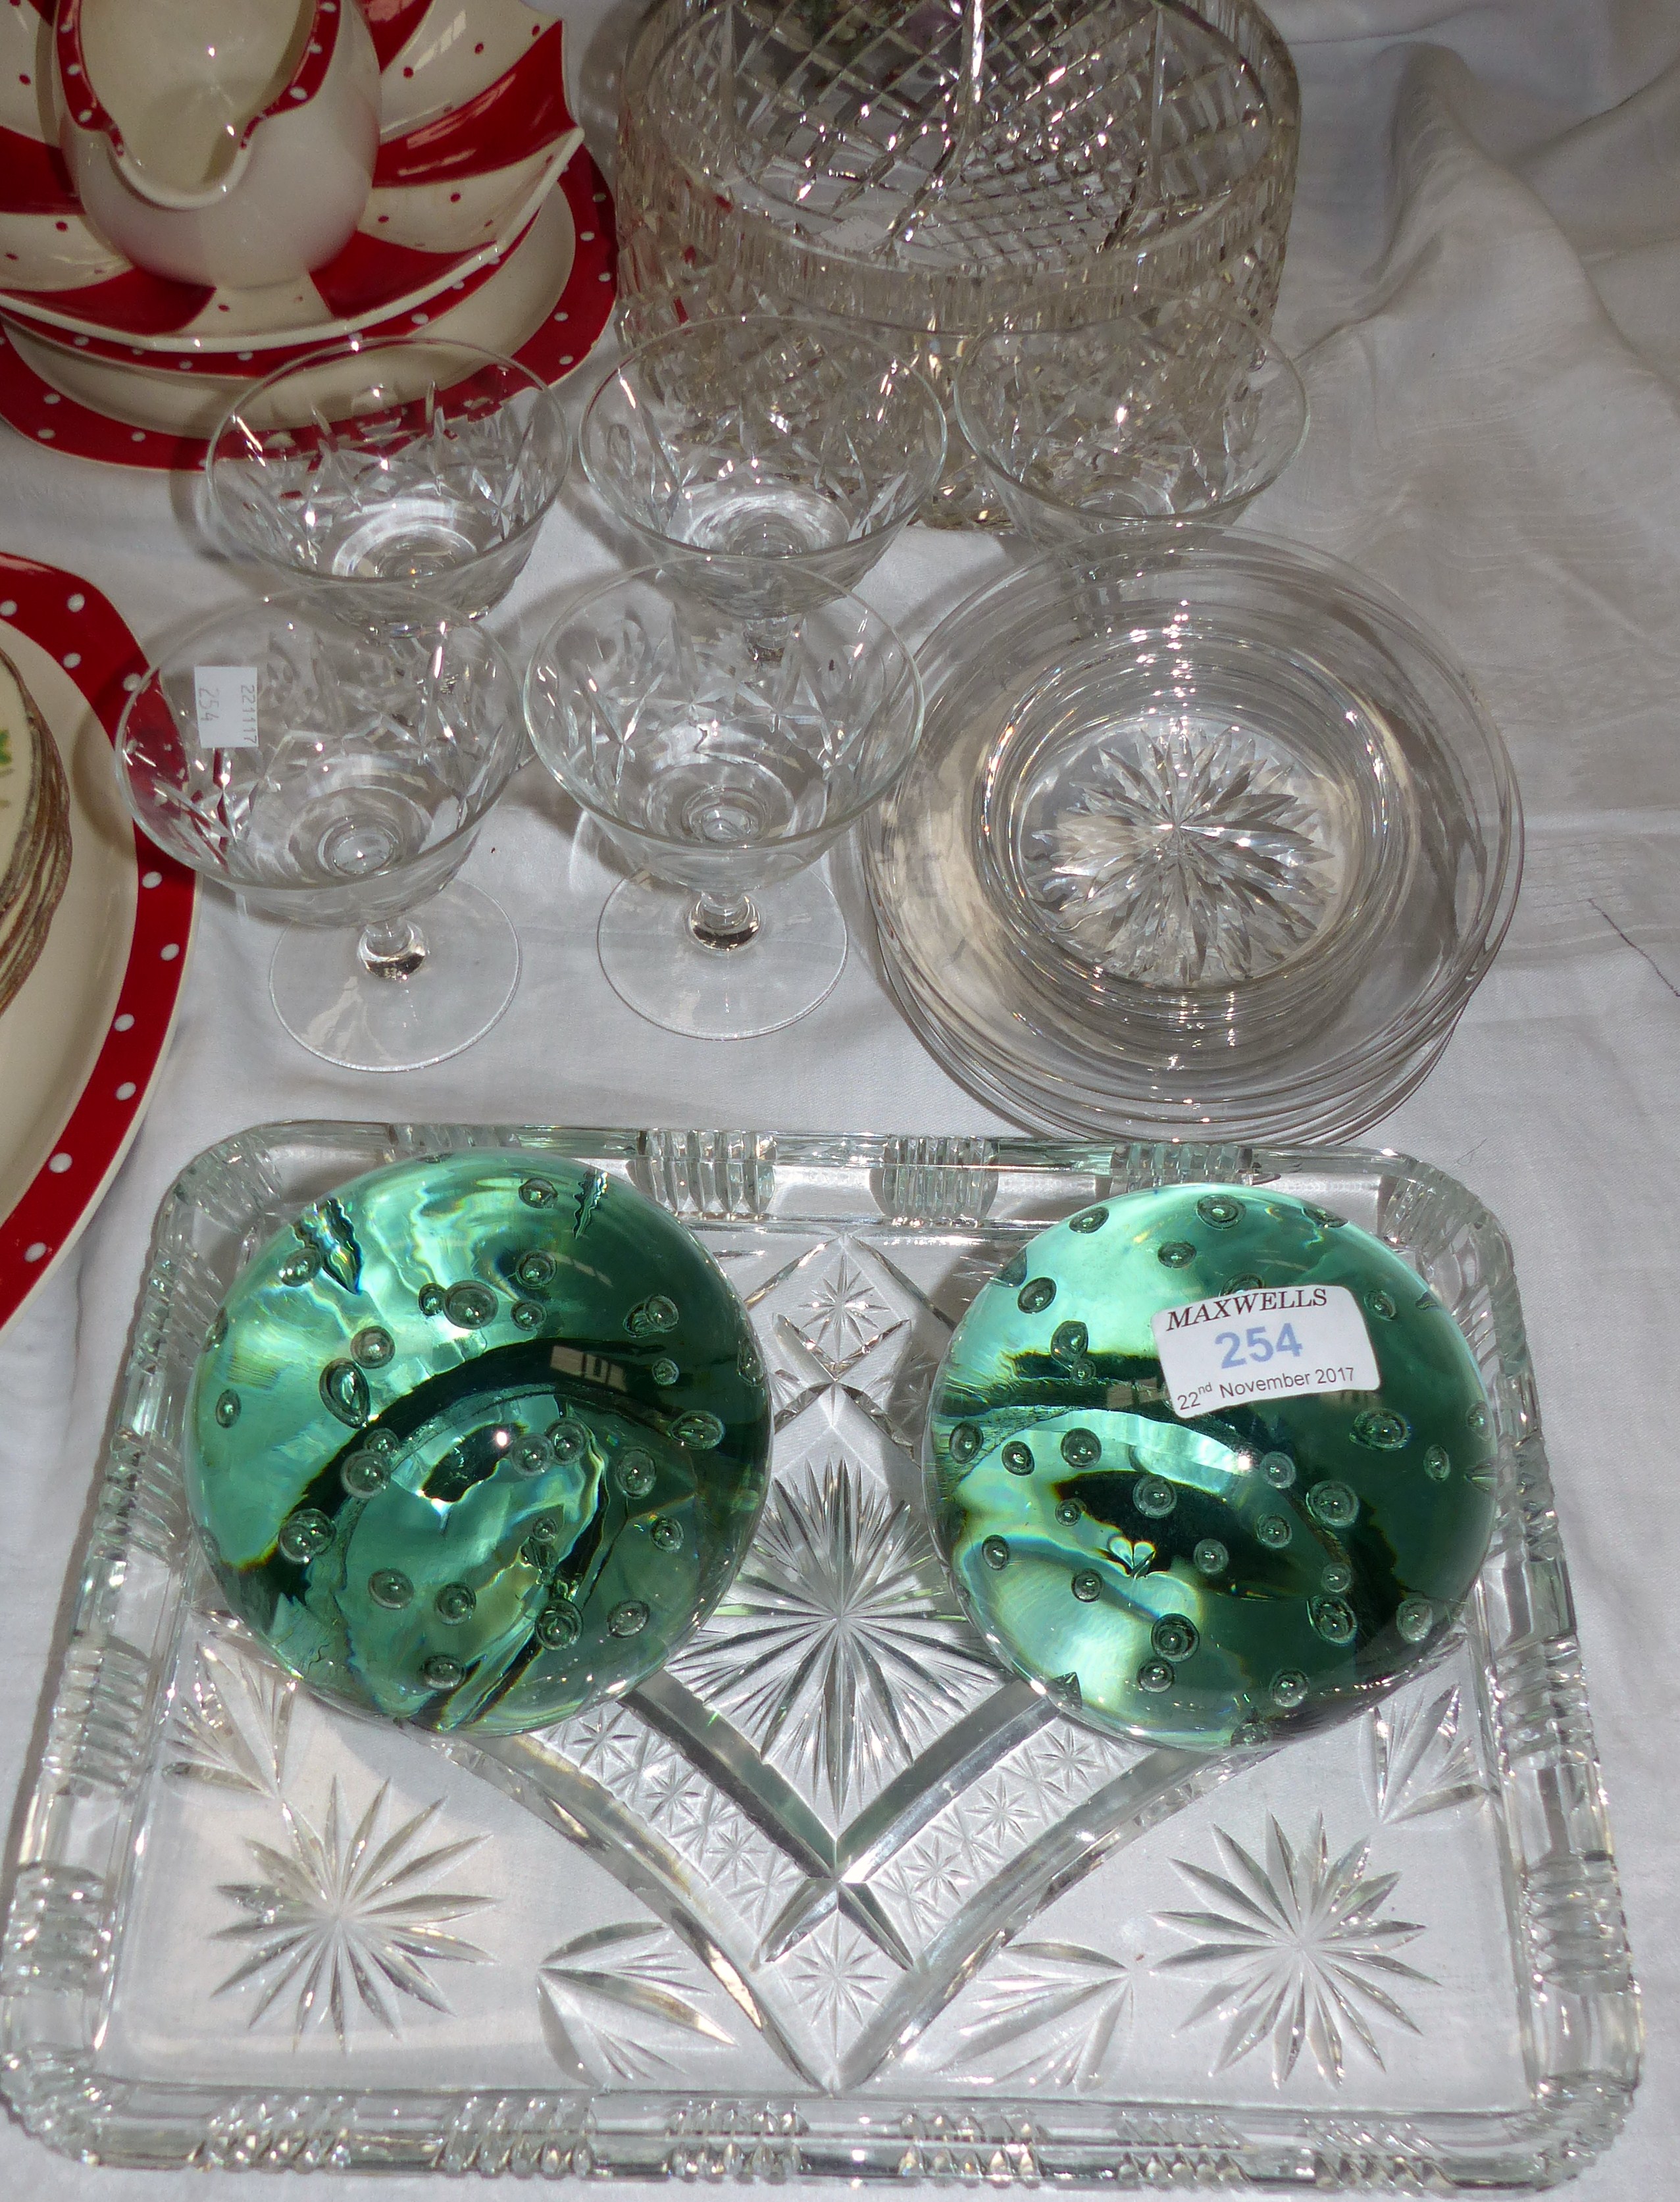 A pair of Victorian glass dumpies and glassware